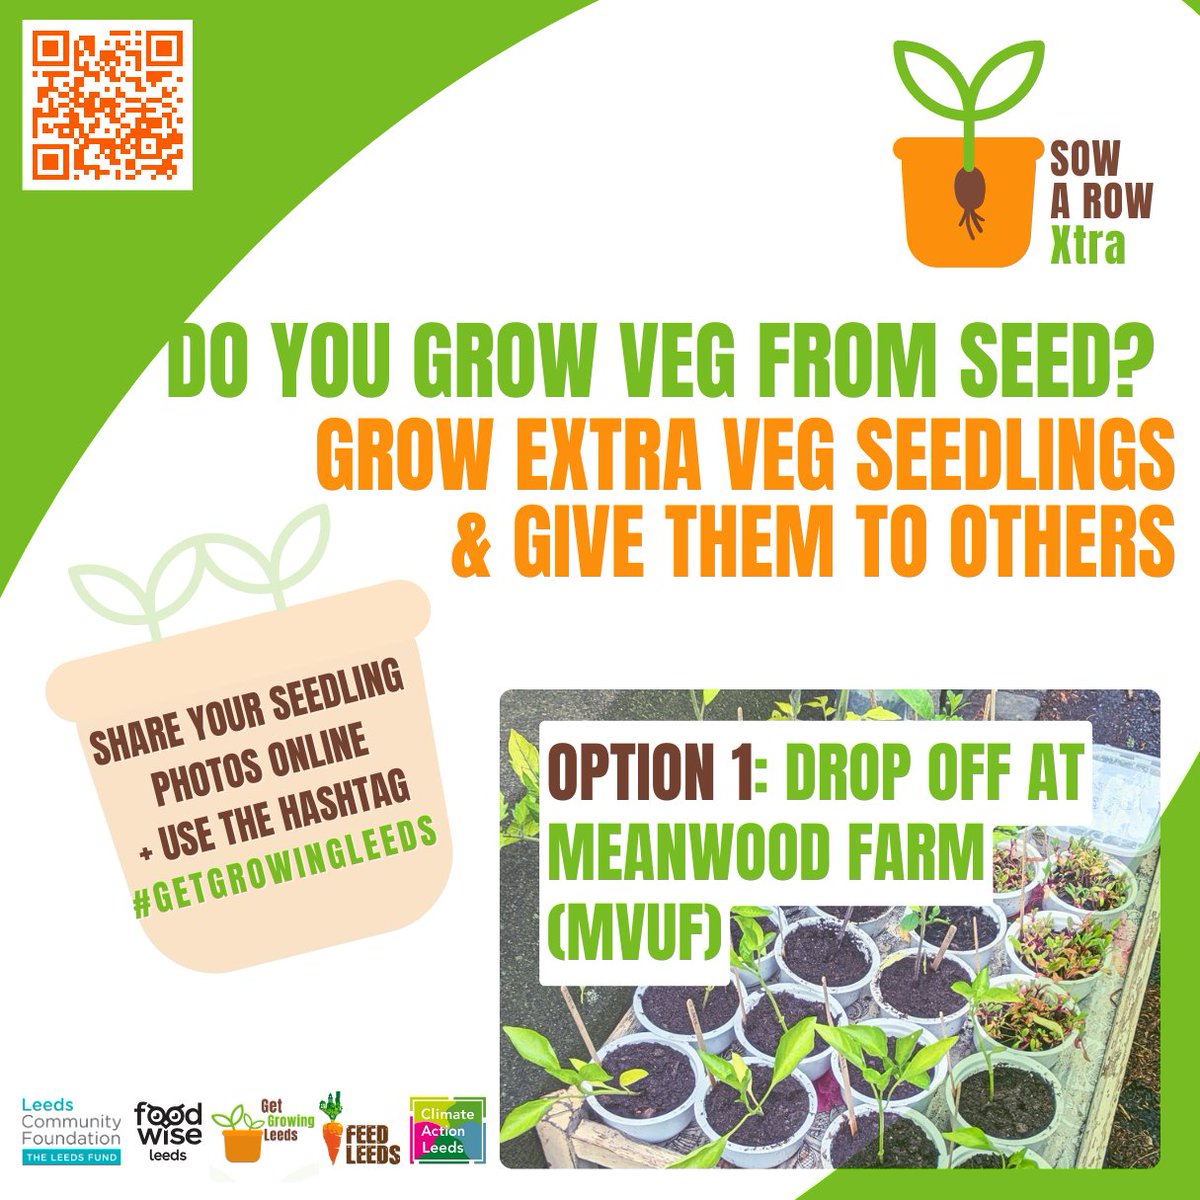 Do you grow veg from seed? Its #GoodToGrow Week And we are launching our #GetGrowingLeeds with #SowARowXtra We want to get more people growing in #Leeds! Do you grow veg from seed? If so, you can help others with your know-how! For more details visit: feedleeds.org/sowx/